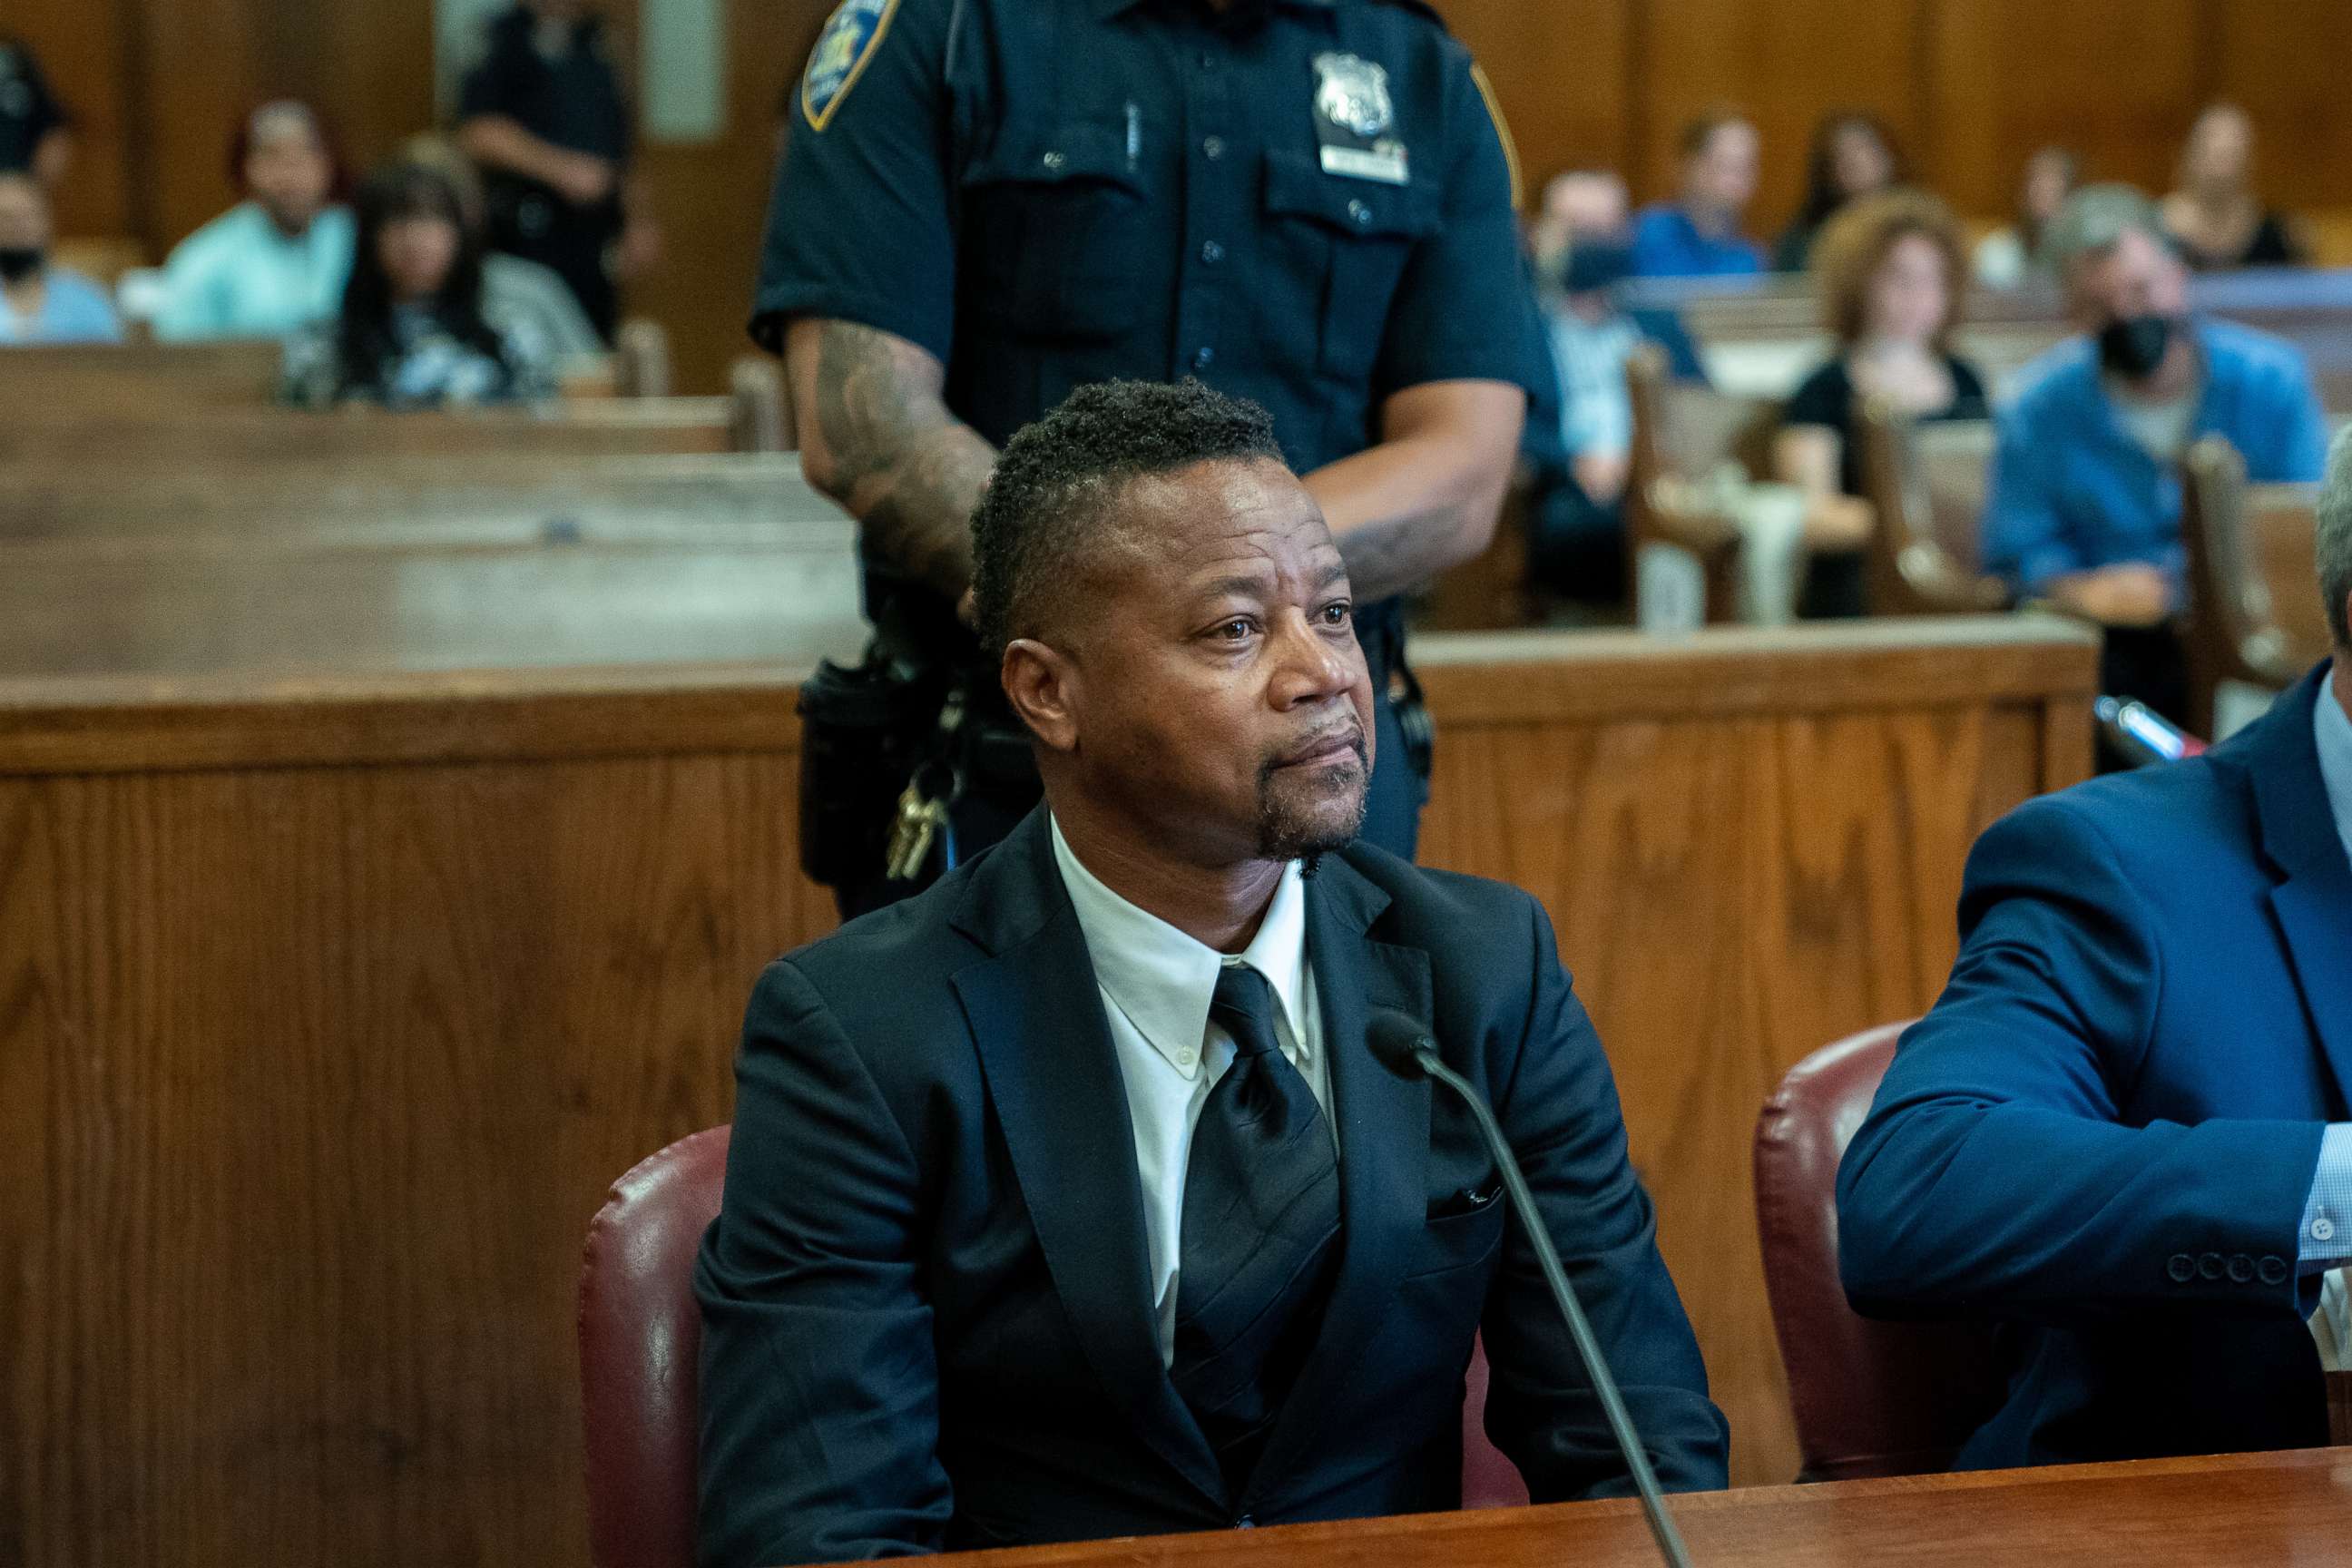 PHOTO: Cuba Gooding Jr. at NYS Supreme Court for sentencing, Oct. 13, 2022 in New York City.